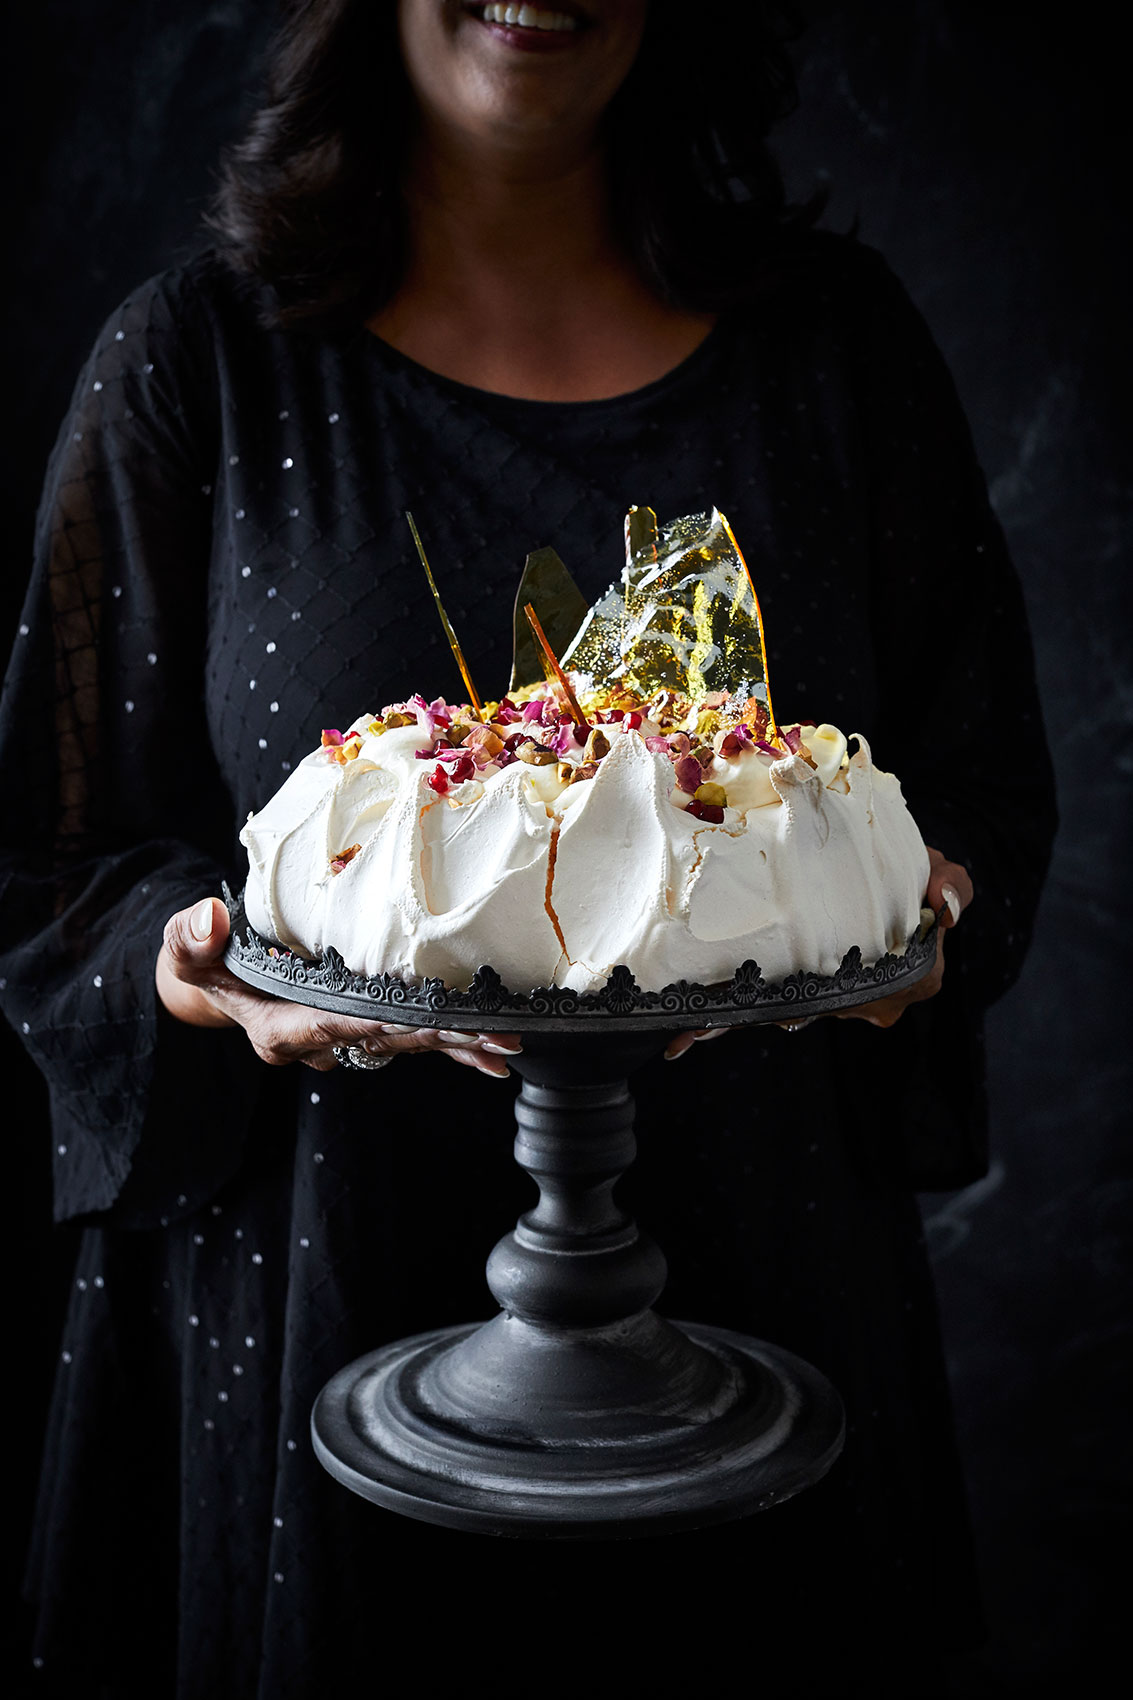 My Indian Kitchen • Festive Spiced Pavlova with Florals & Caramel Shards • Cookbook & Editorial Food Photography